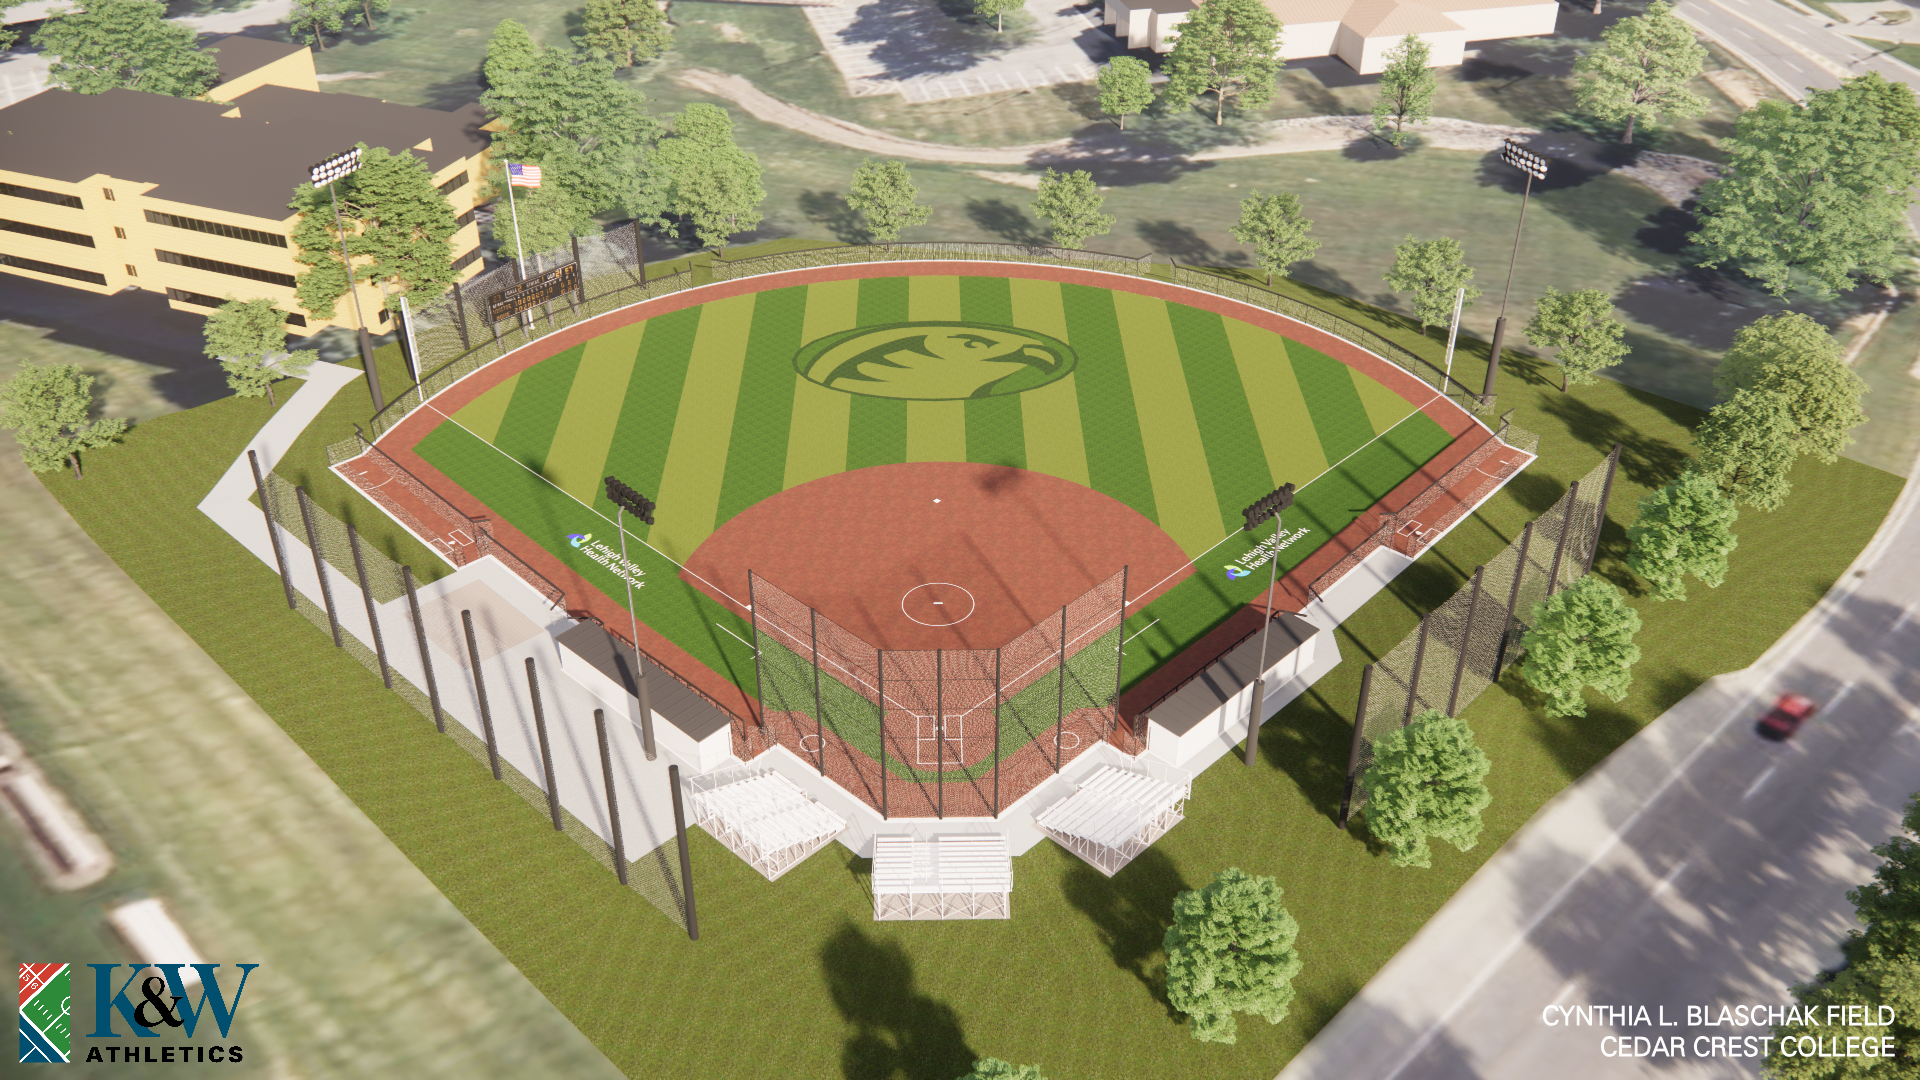 a computer rendering of a softball field with the cedar crest falcons logo in the center of the outfield